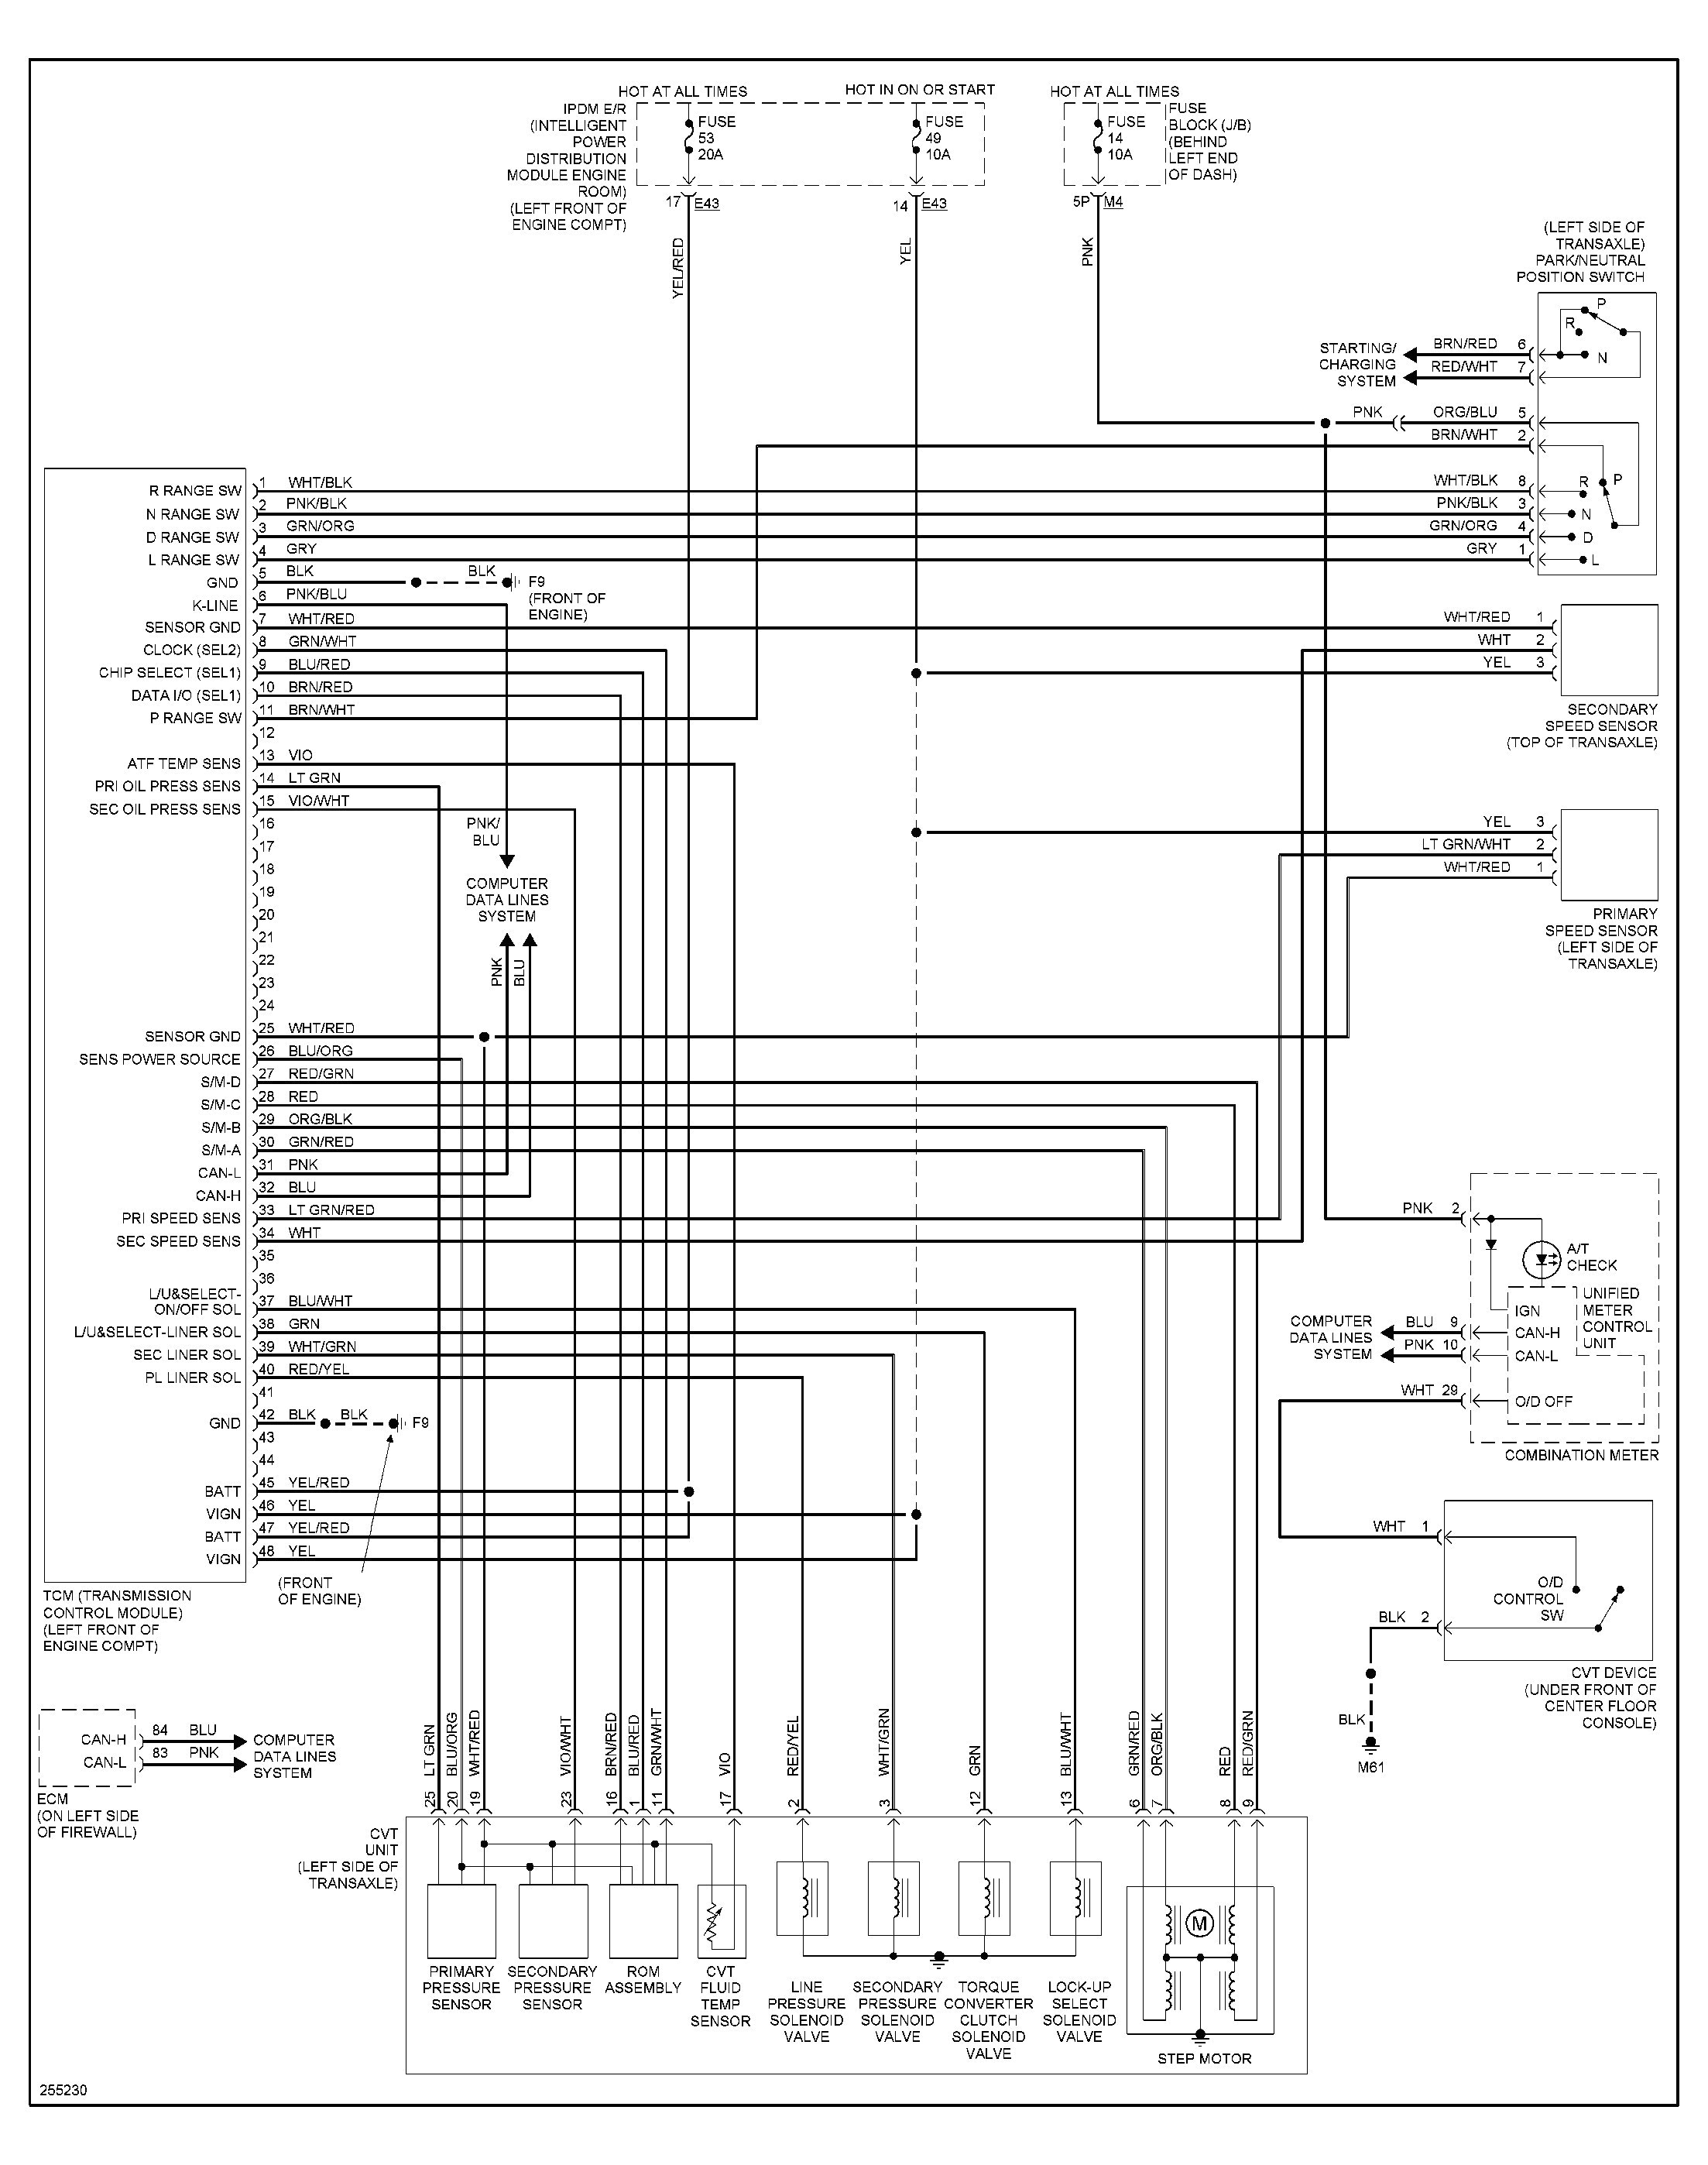 98 pathfinder fuse box wiring diagram 1996 nissan pathfinder picture of fuse panel diagram schematics out1996